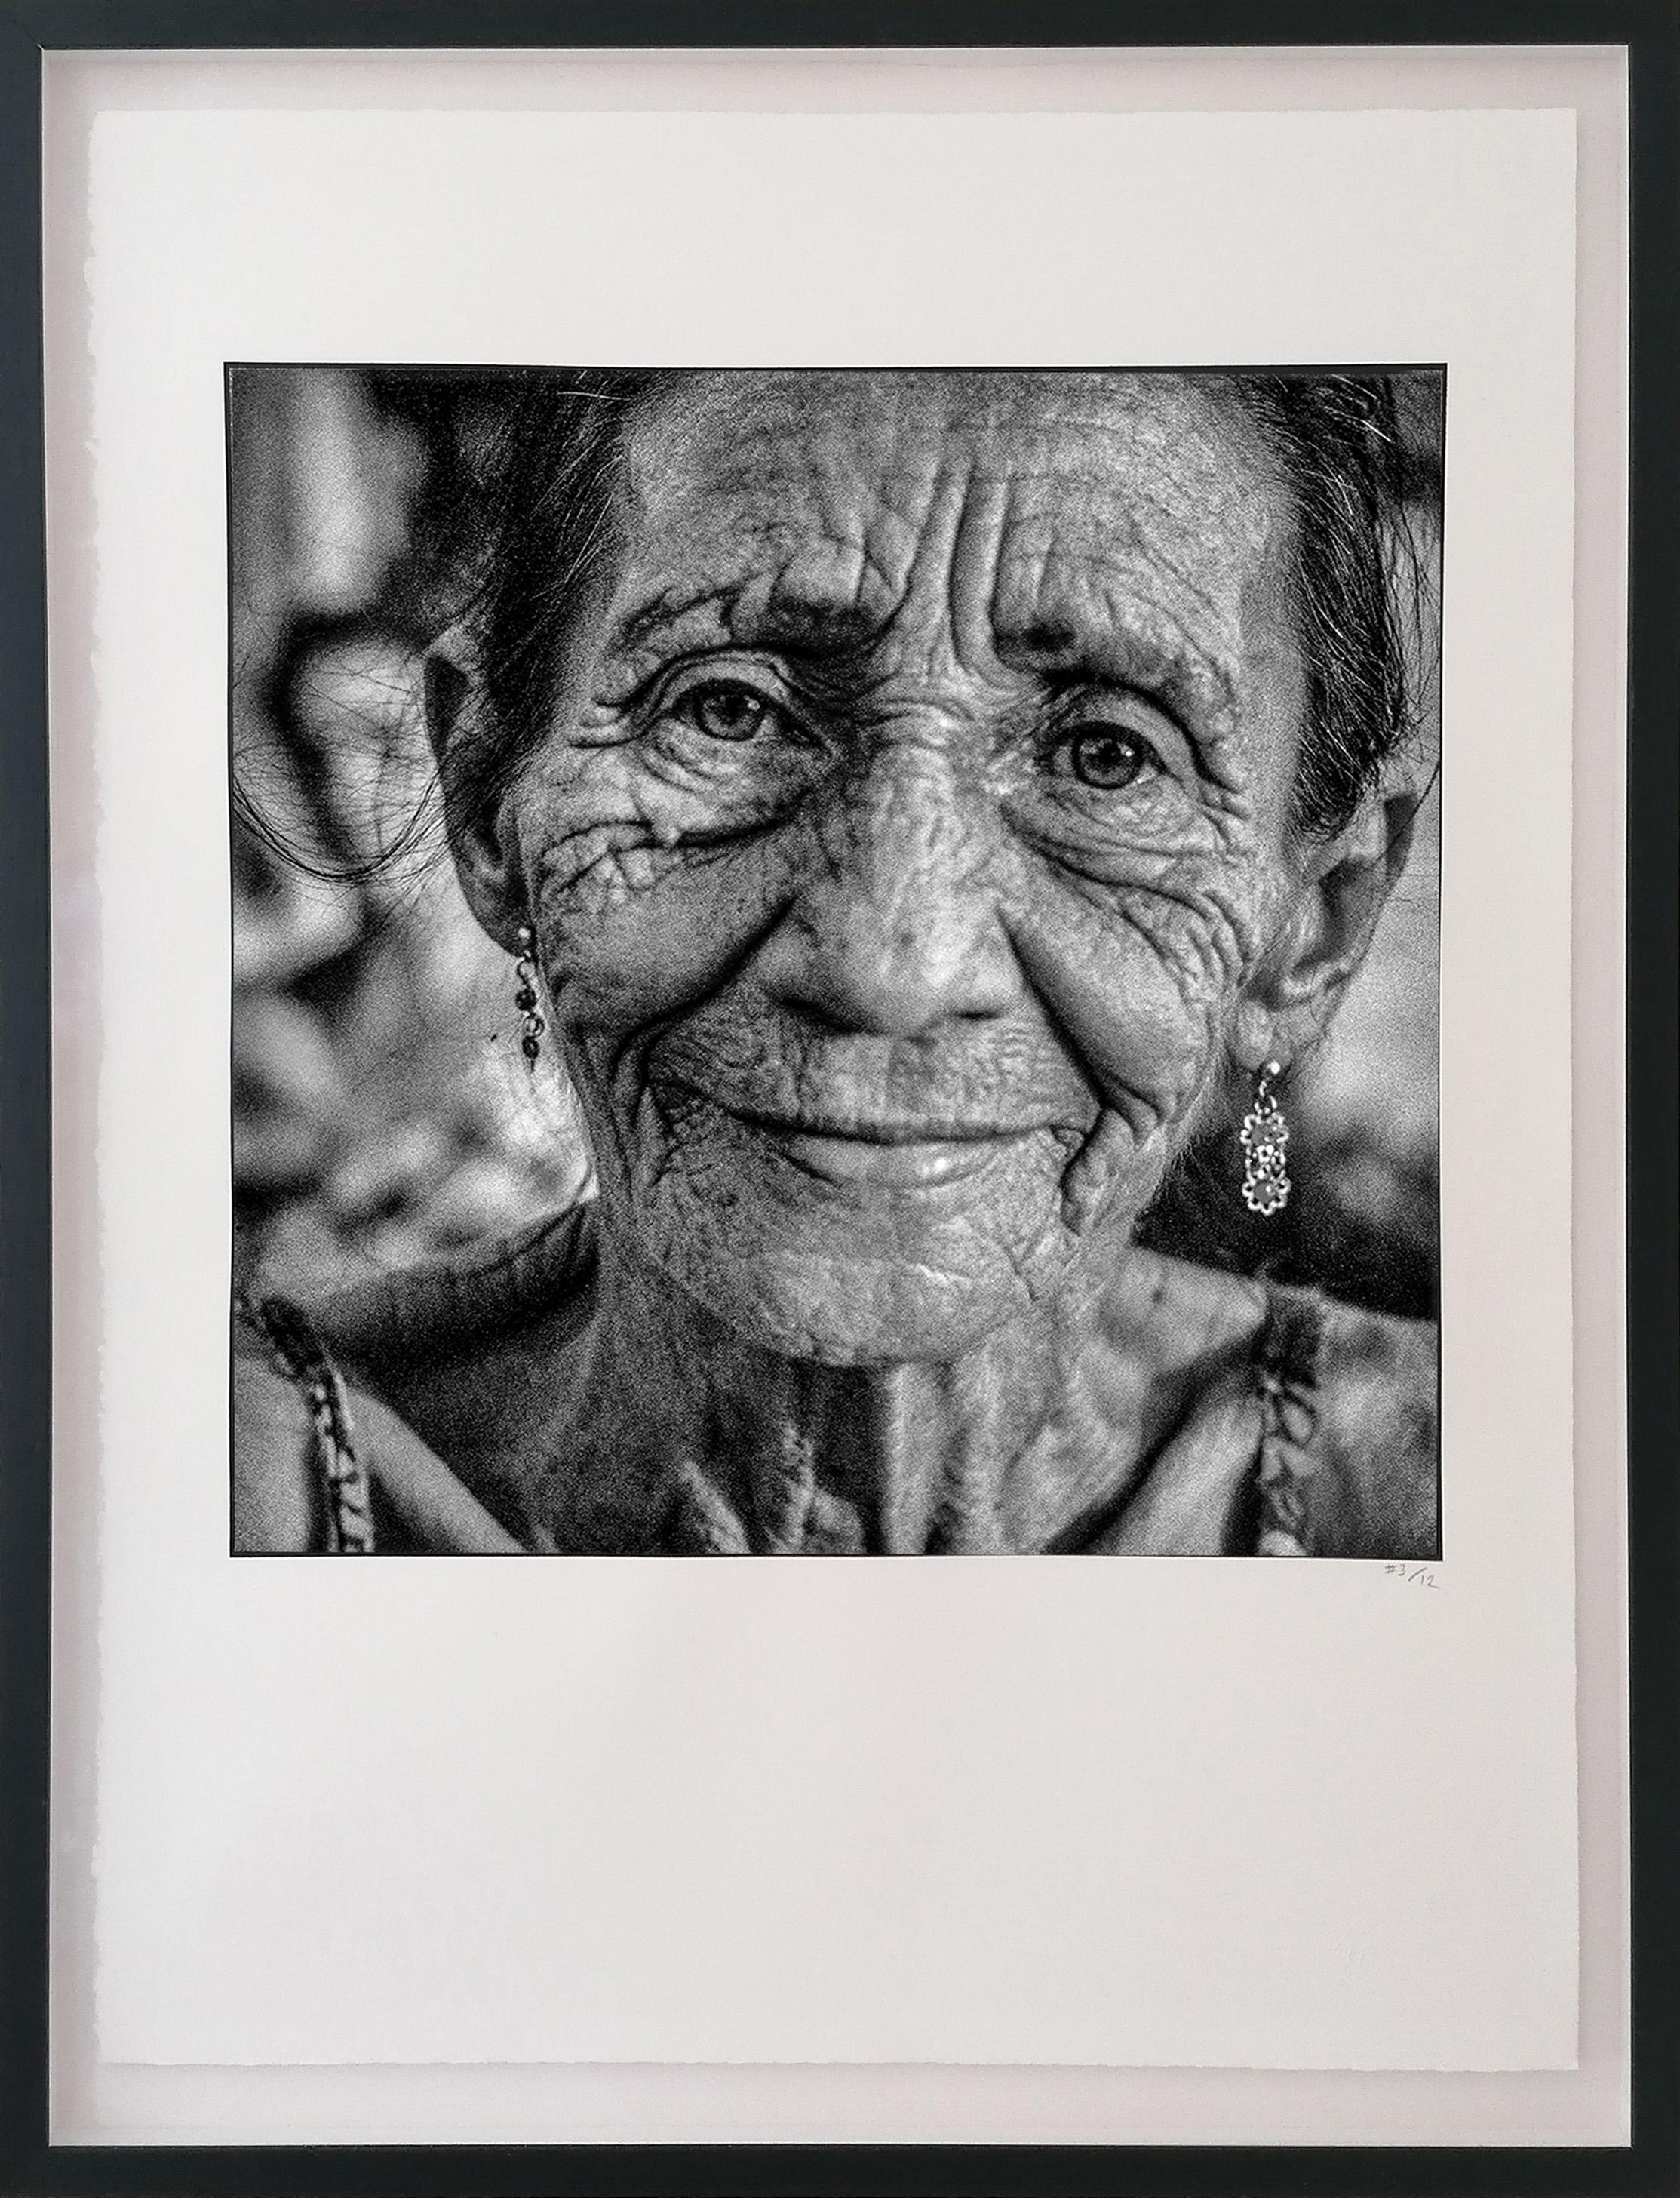 The old country girl from the Escambray mountains. I was hiking in the mountains, close to Trinidad, when I met the family. They invited me in and we chatted about our different lives. Theirs was one of constancy and graft on the land, mine of